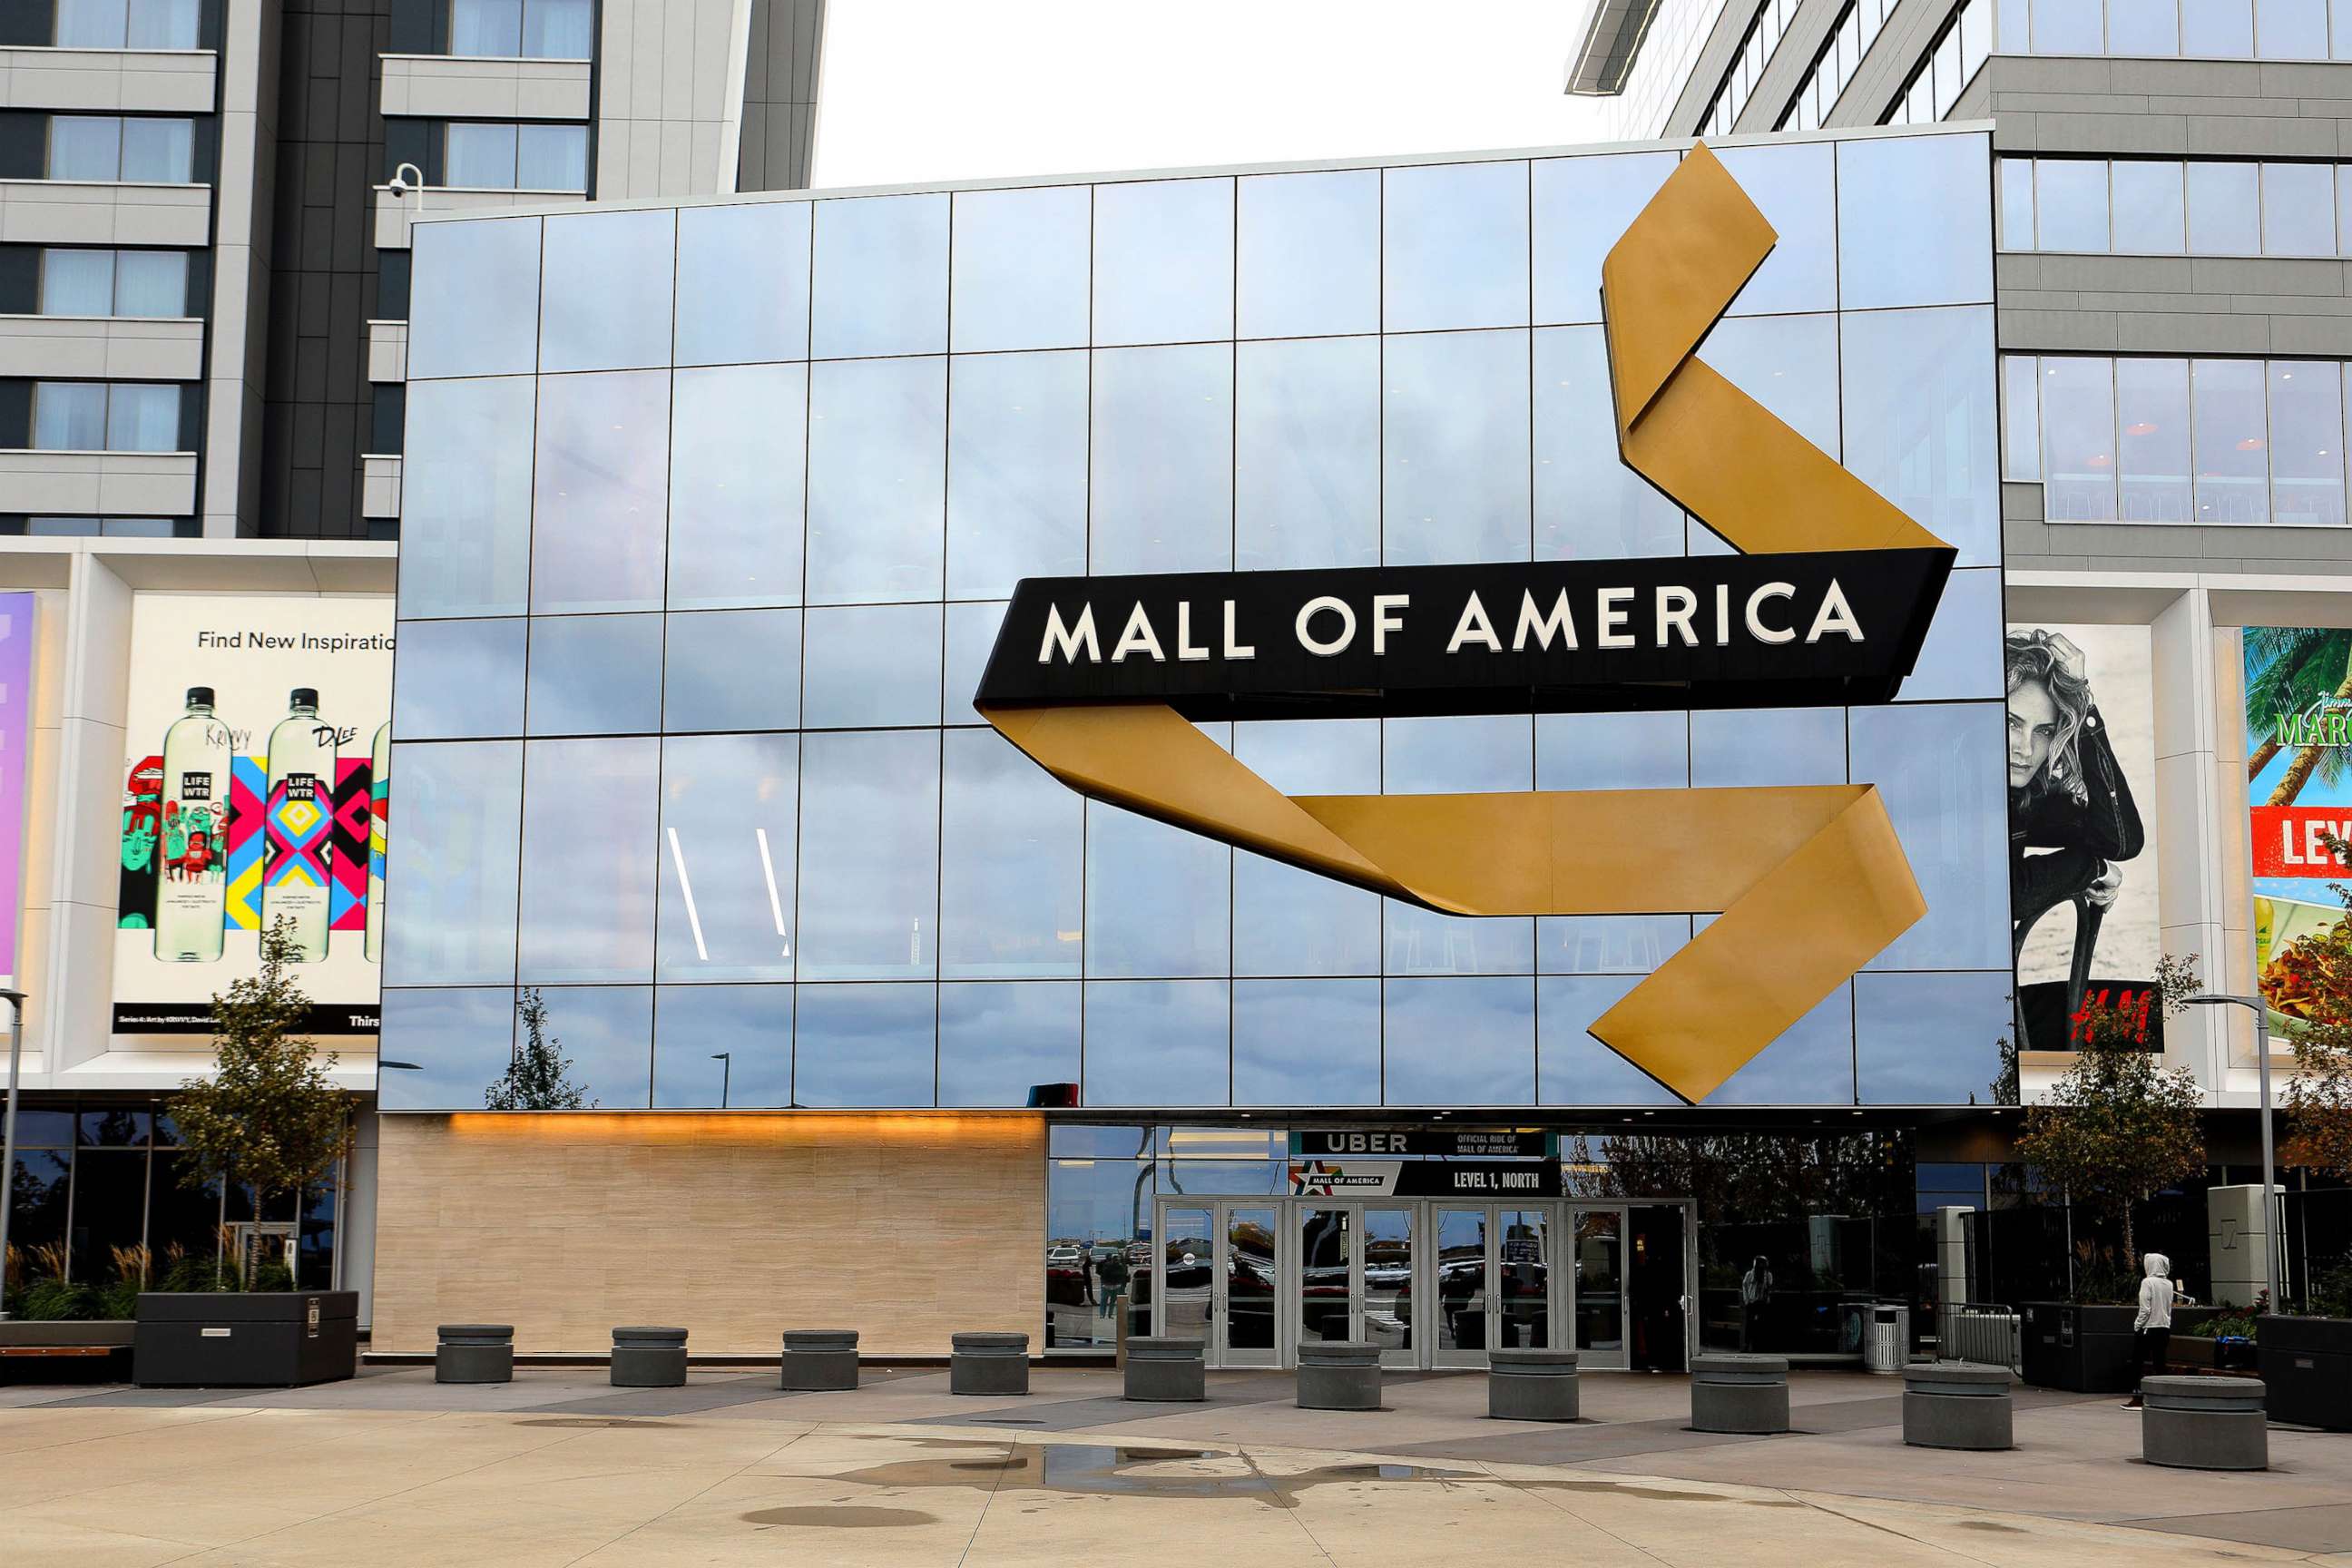 PHOTO: In this October 14, 2018, file photo, the north entrance to Mall Of America in Bloomington, Minn. is shown.